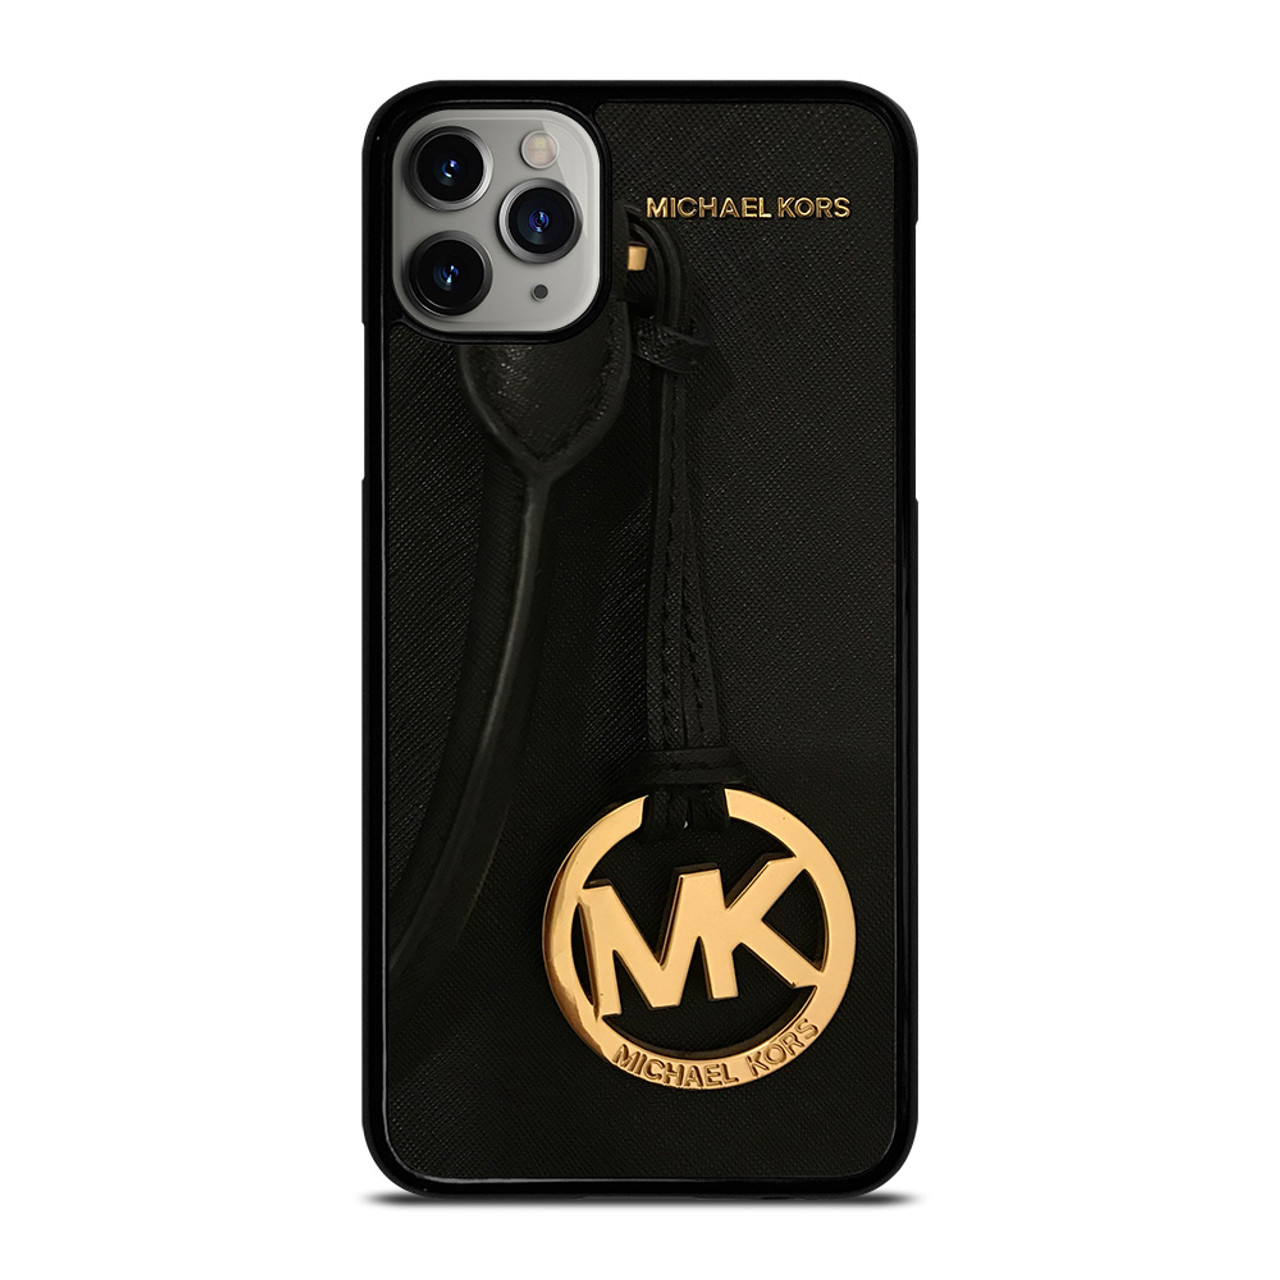 Smartphone accessories for iPhone 12 series from New Yorkbased fashion  brand MICHAEL KORS a popular brand among a wide range of people for its  classy feminine ambience are now available  FOXINC 